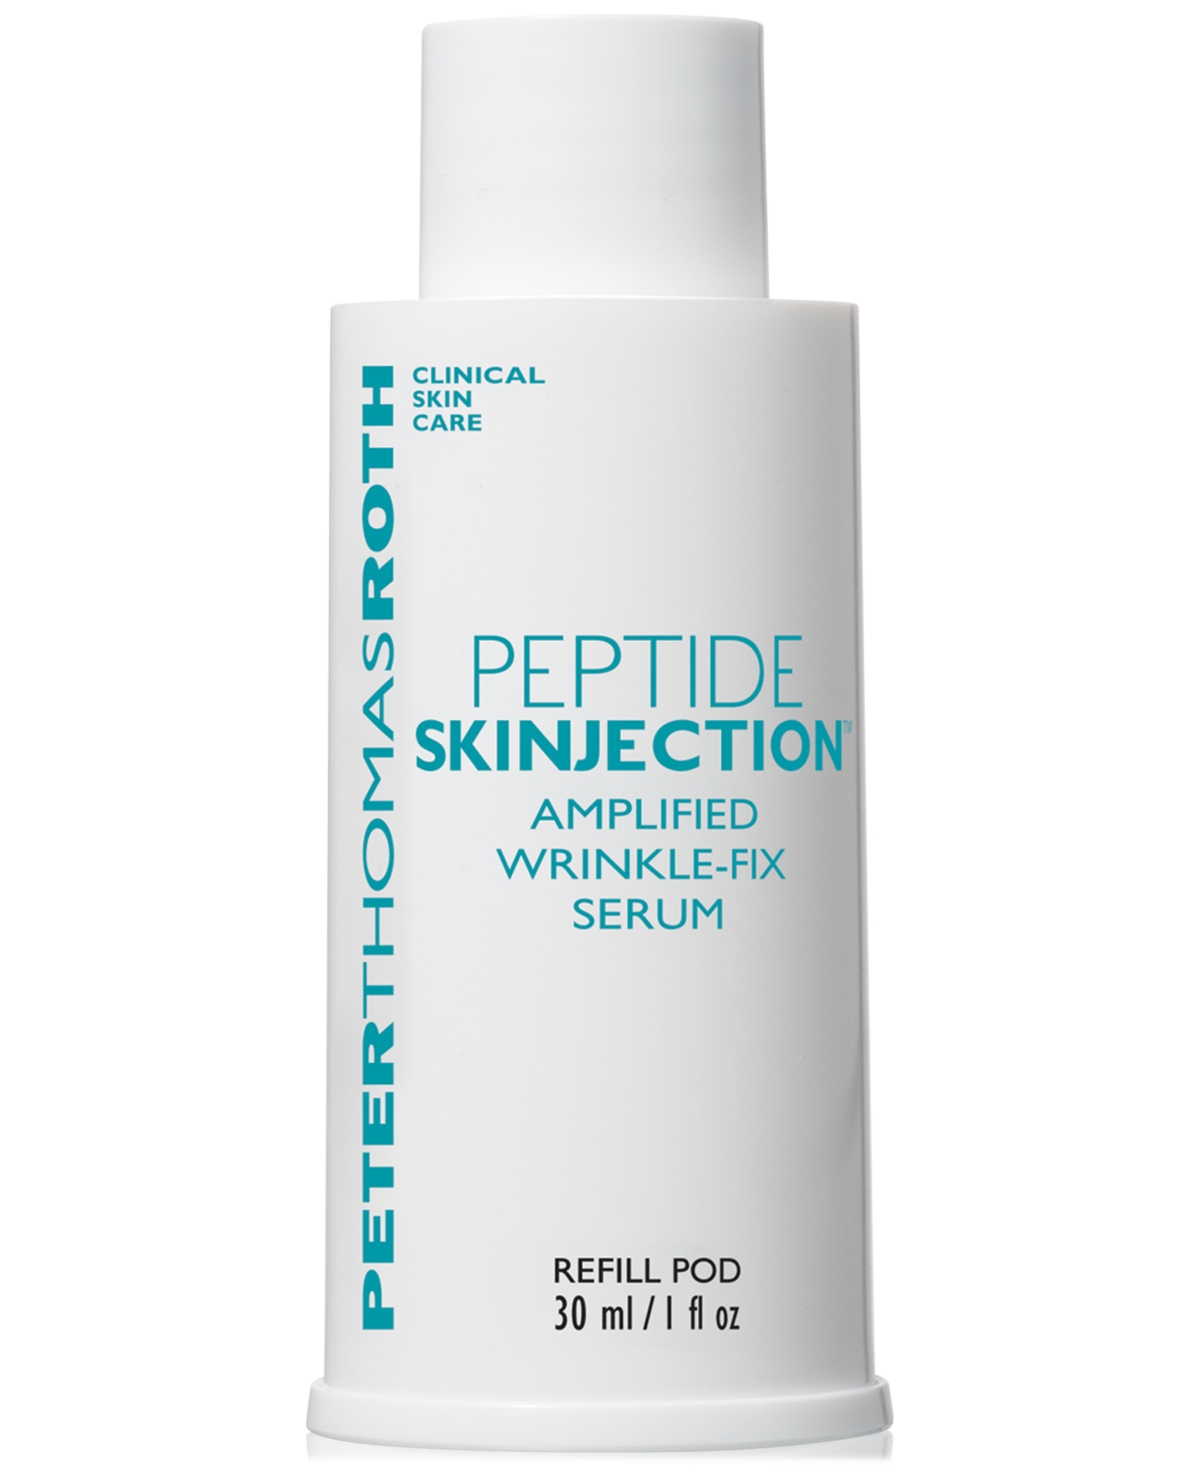 Peter Thomas Roth Peptideâ Skinjection Amplified Wrinkle-fix Serum Refill Pod, 1 oz In No Color